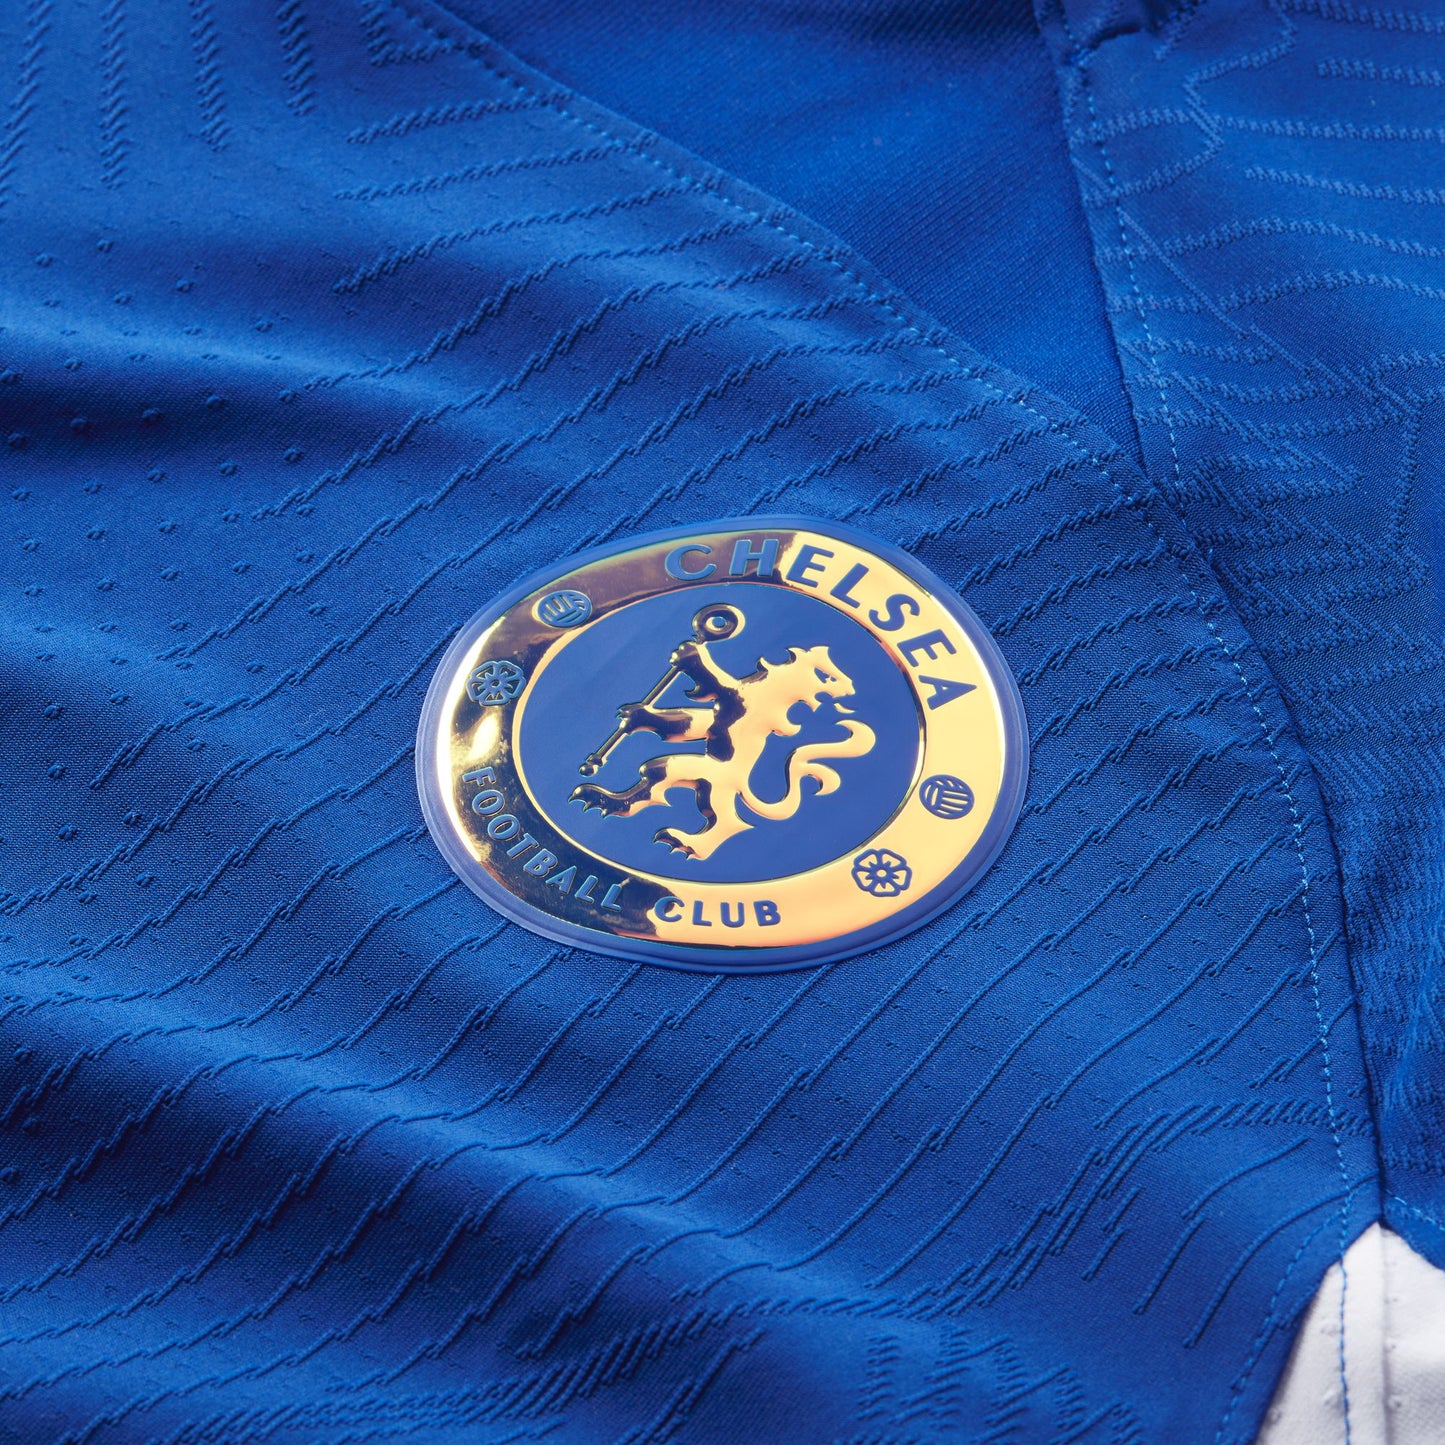 Chelsea Home 23/24 Straight Fit Nike Match Shirt